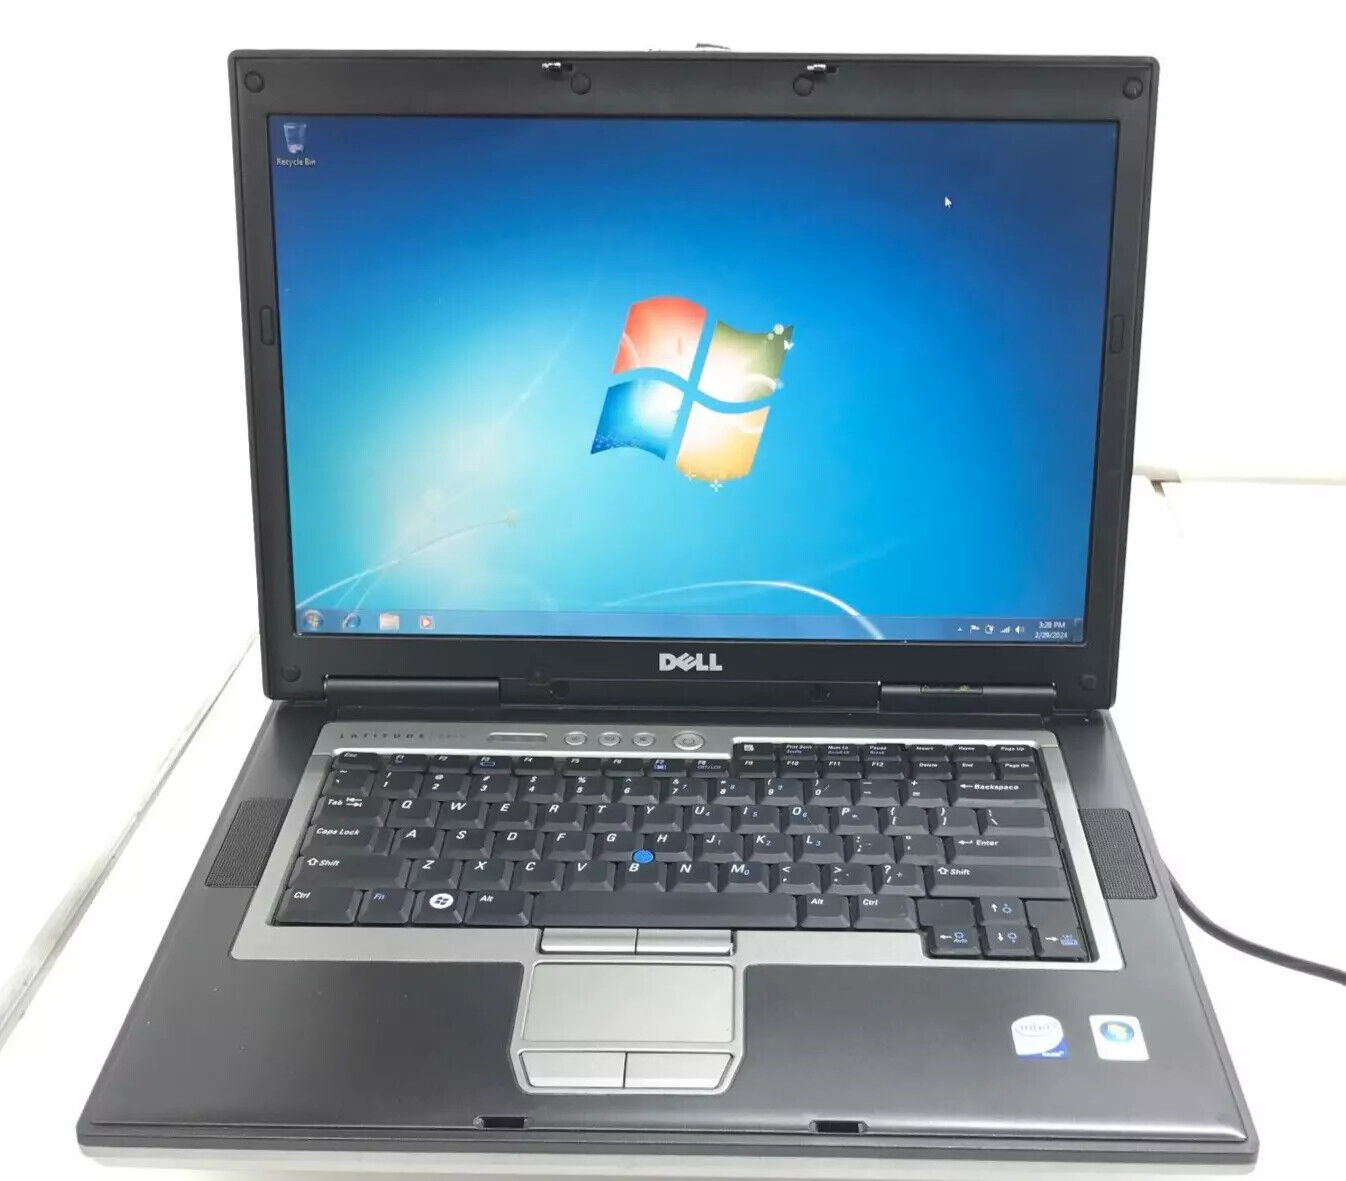 Dell Latitude D830 Laptop 2 Duo CPU T7300 @ 2.00GHz 4GB - Screen has pink lines